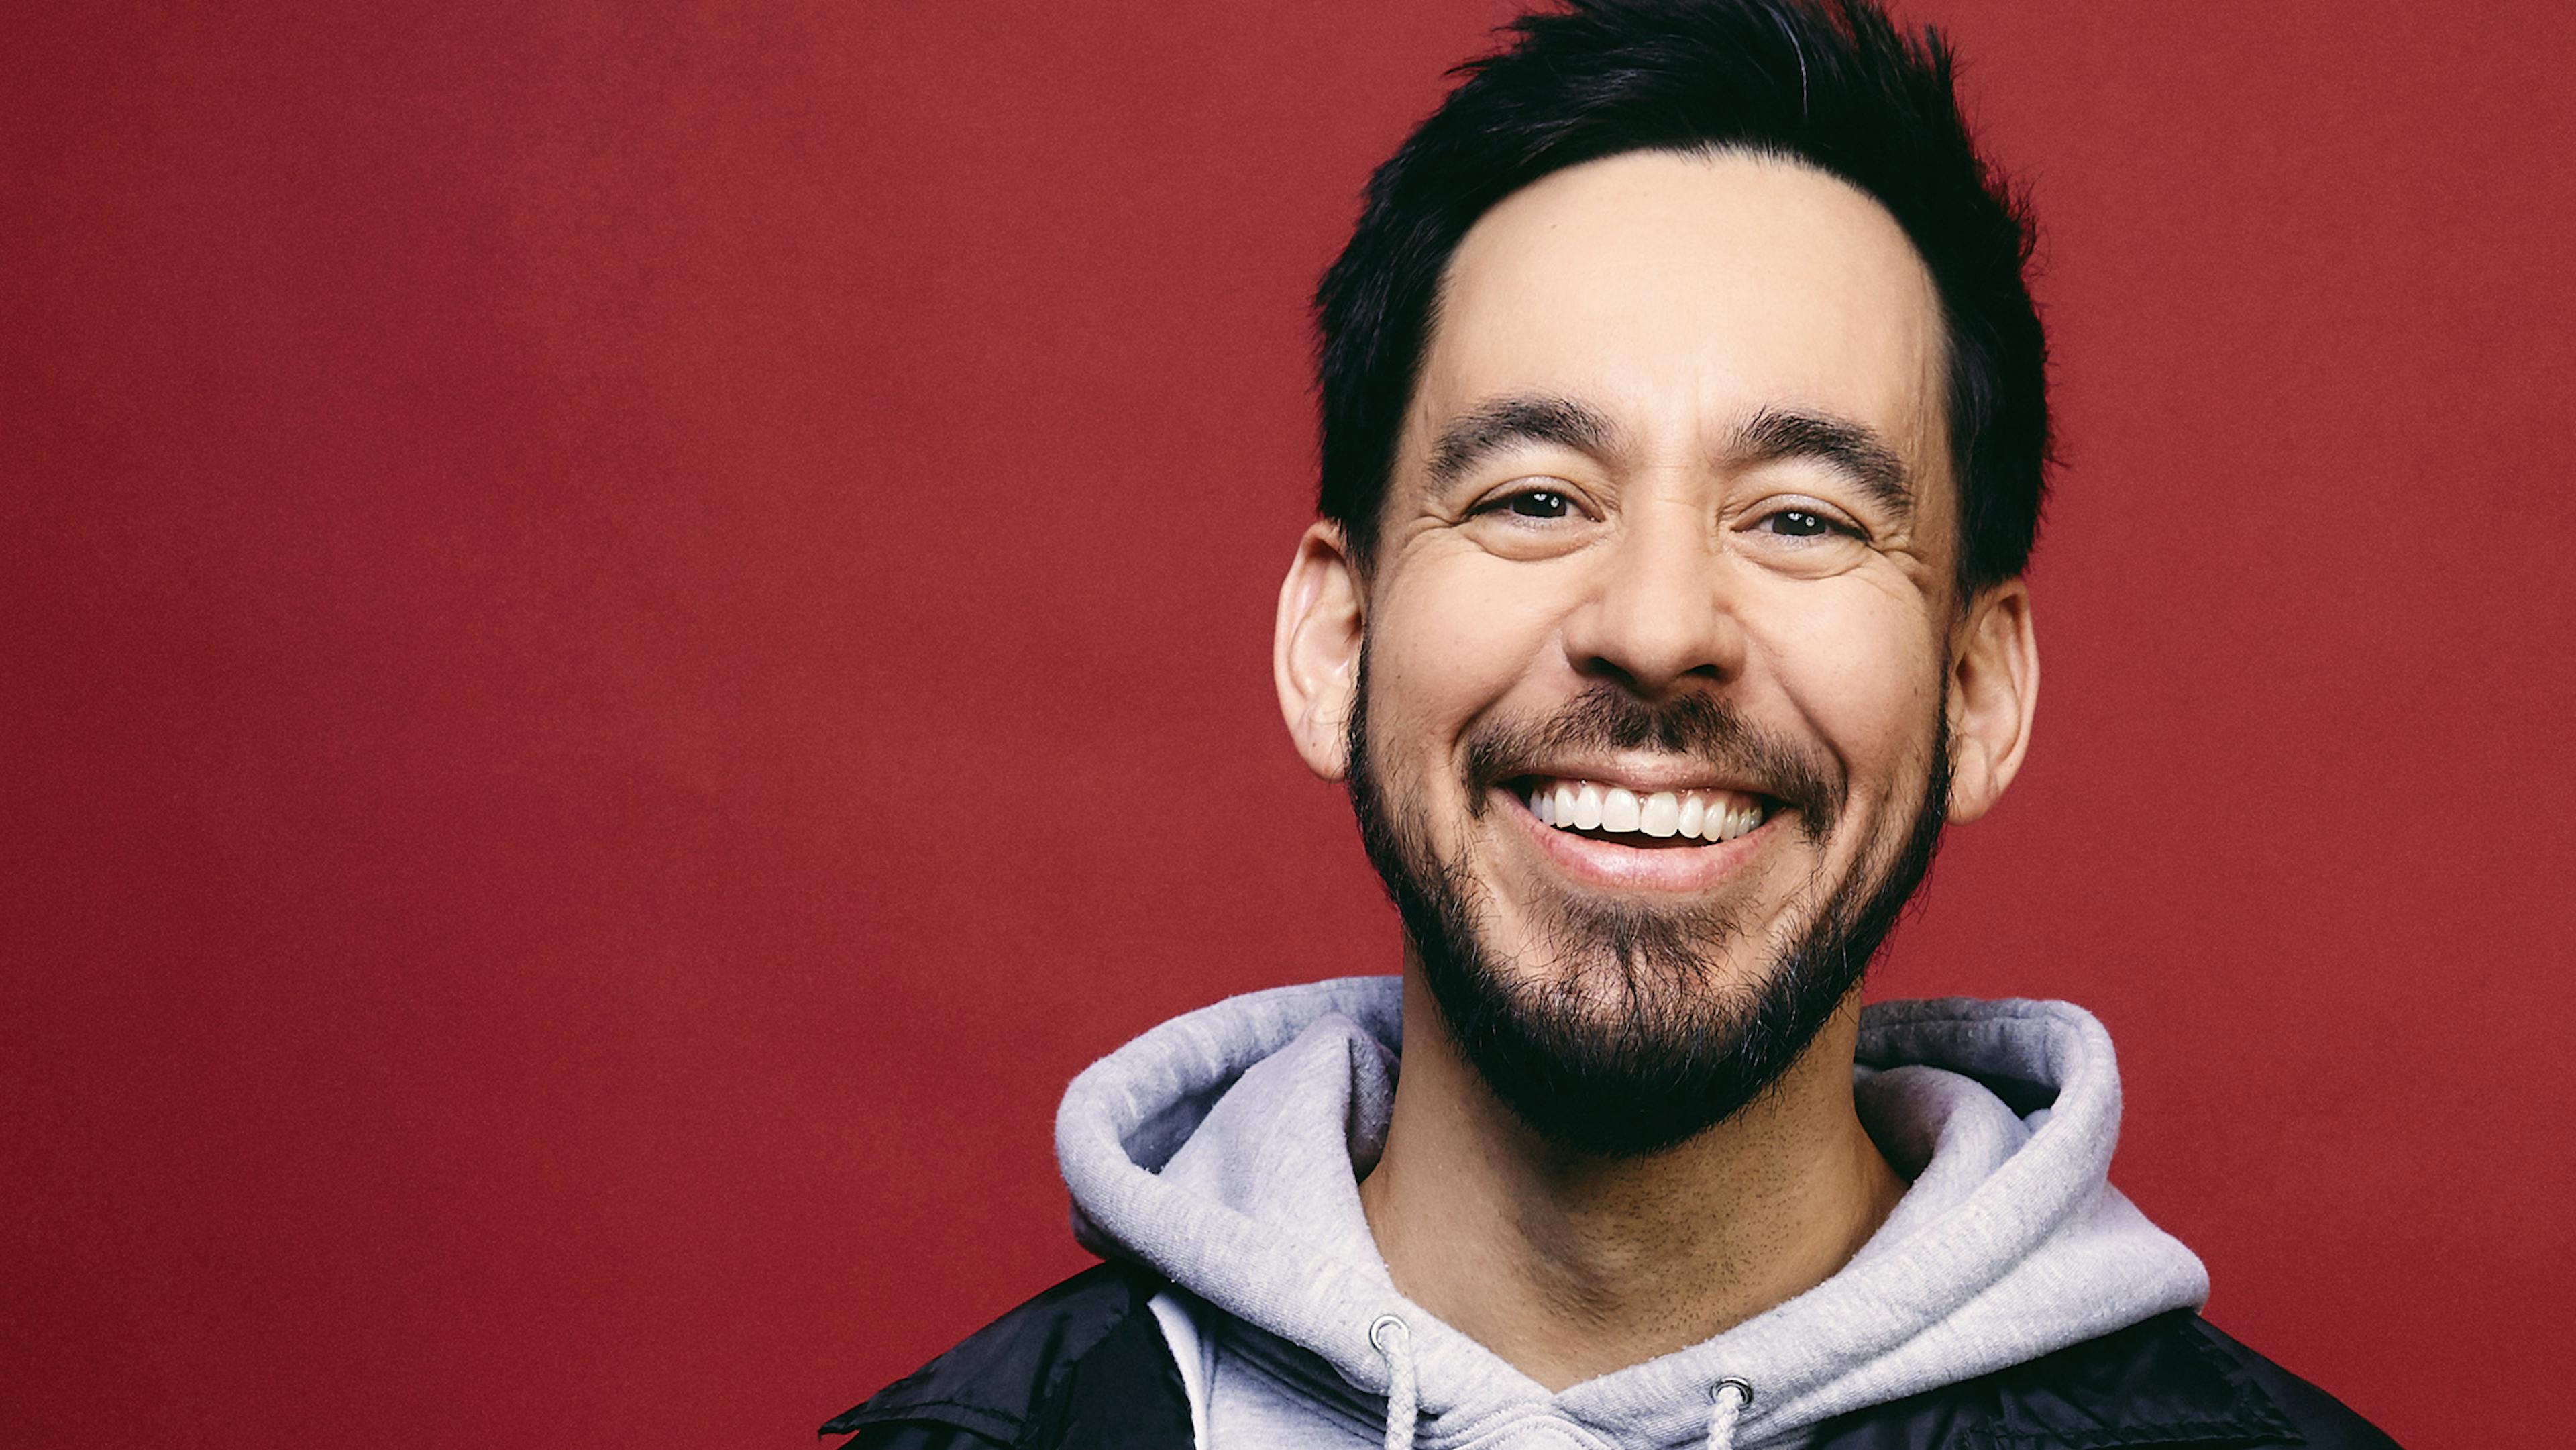 Mike Shinoda Has A Message For His Fans Going Into 2020